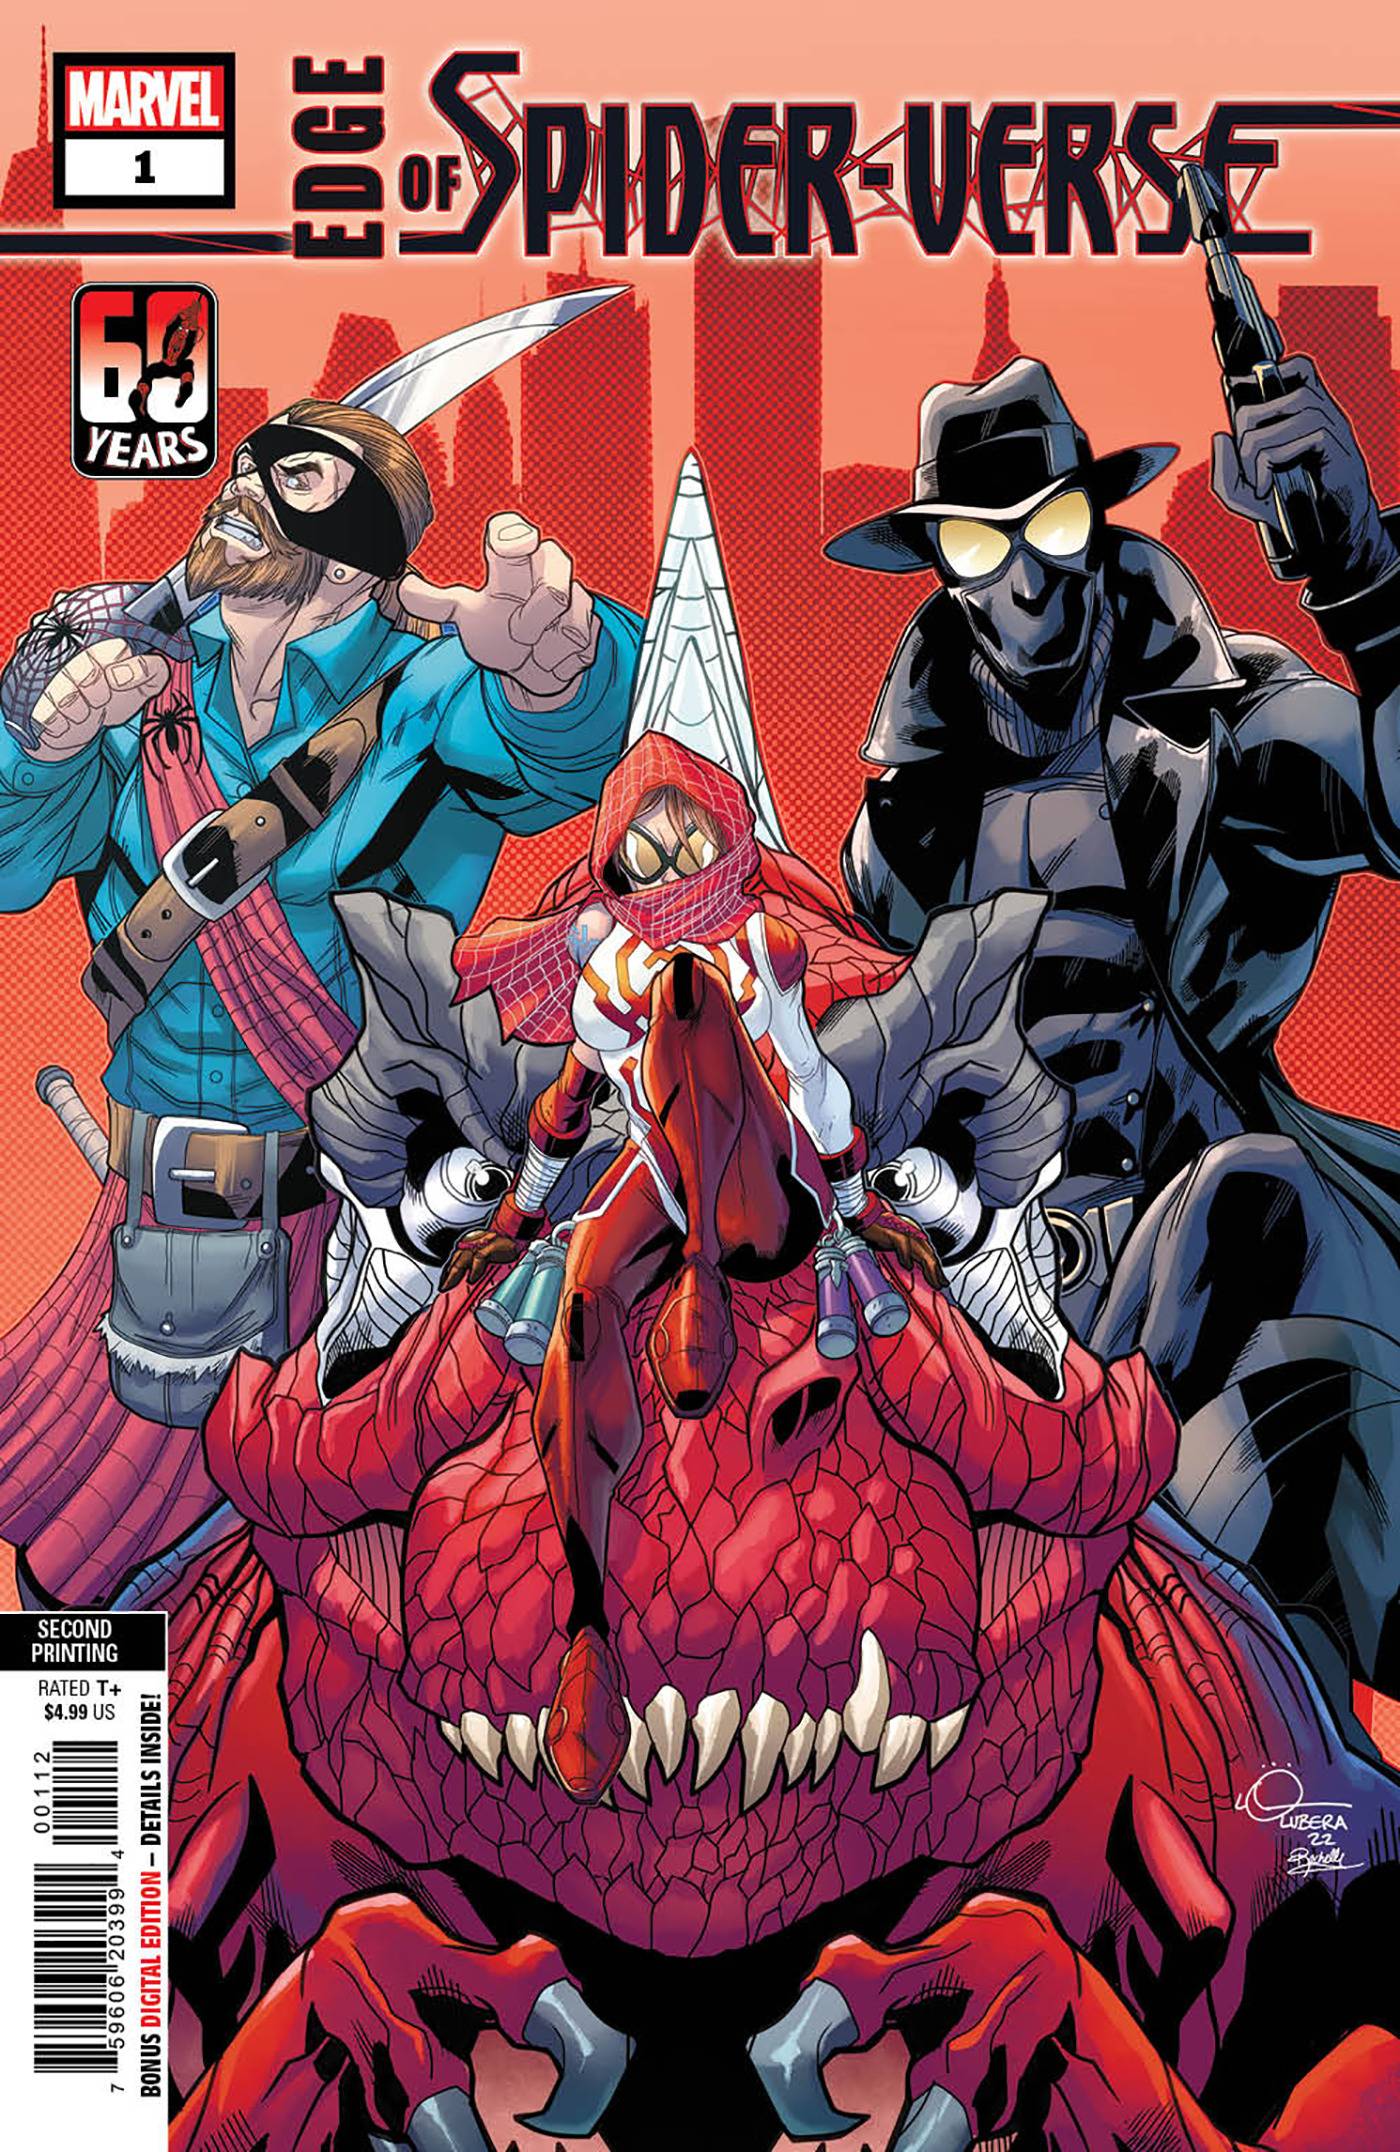 THIS WEEK'S NEW COMICS (RELEASE DATE 09/14/22)